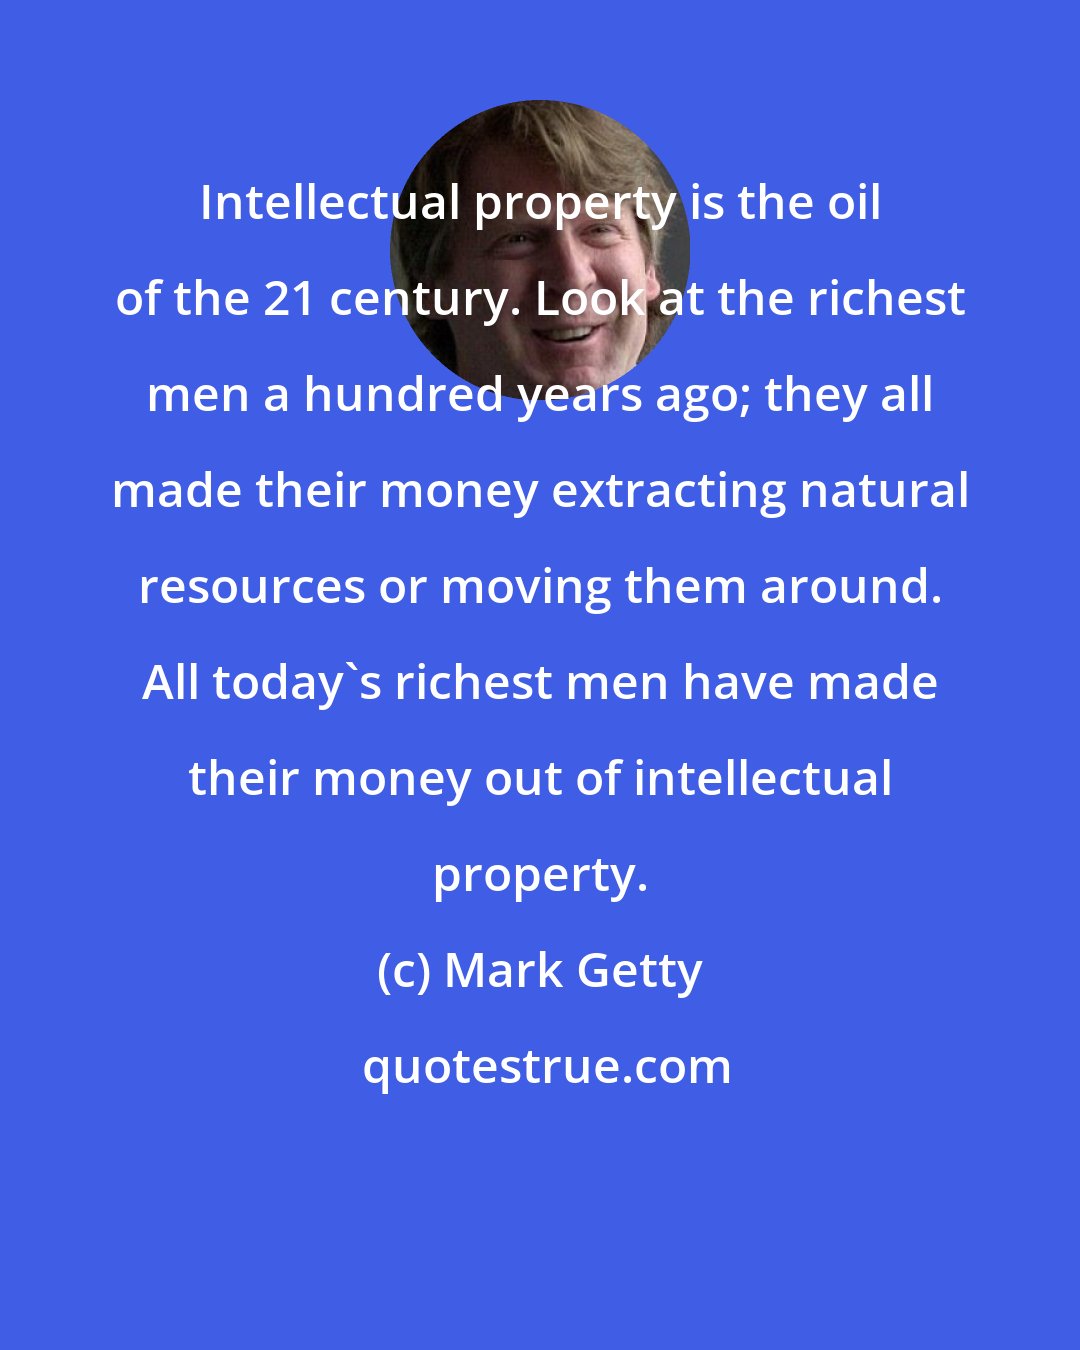 Mark Getty: Intellectual property is the oil of the 21 century. Look at the richest men a hundred years ago; they all made their money extracting natural resources or moving them around. All today's richest men have made their money out of intellectual property.